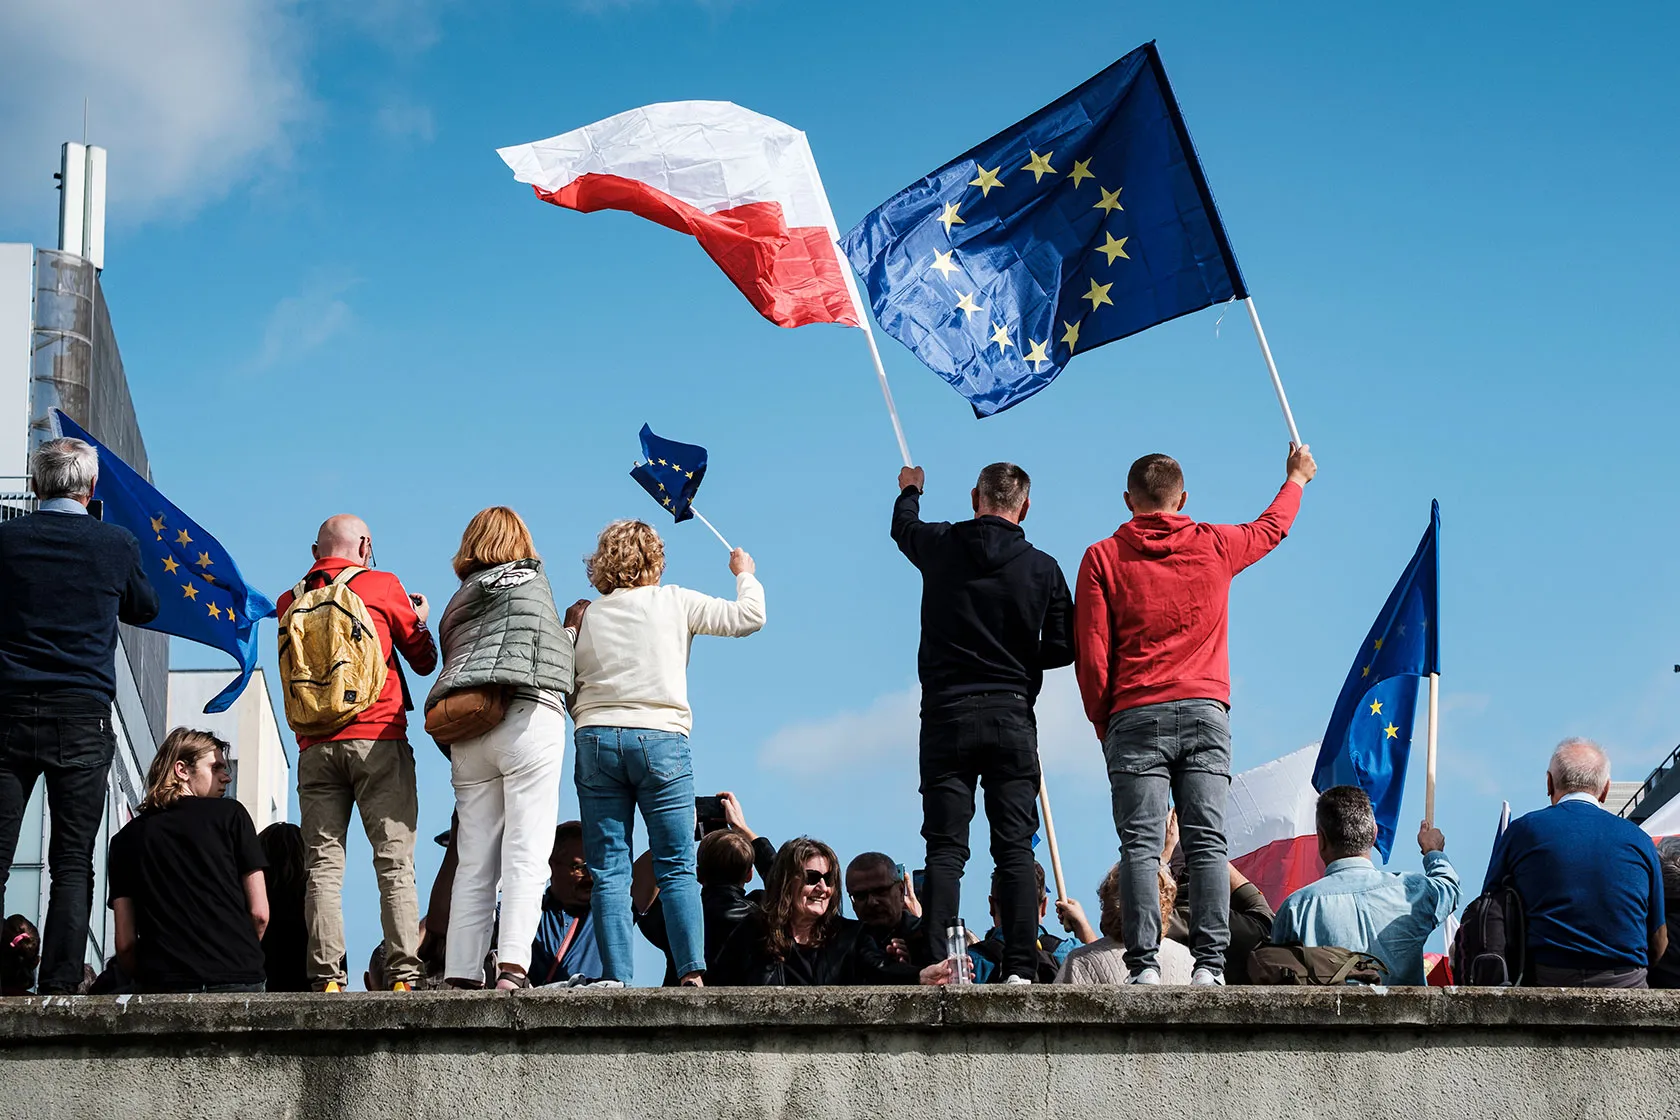 Photo shows five people standing on a wall waving the EU flag and the Polish flag against a clear blue sky